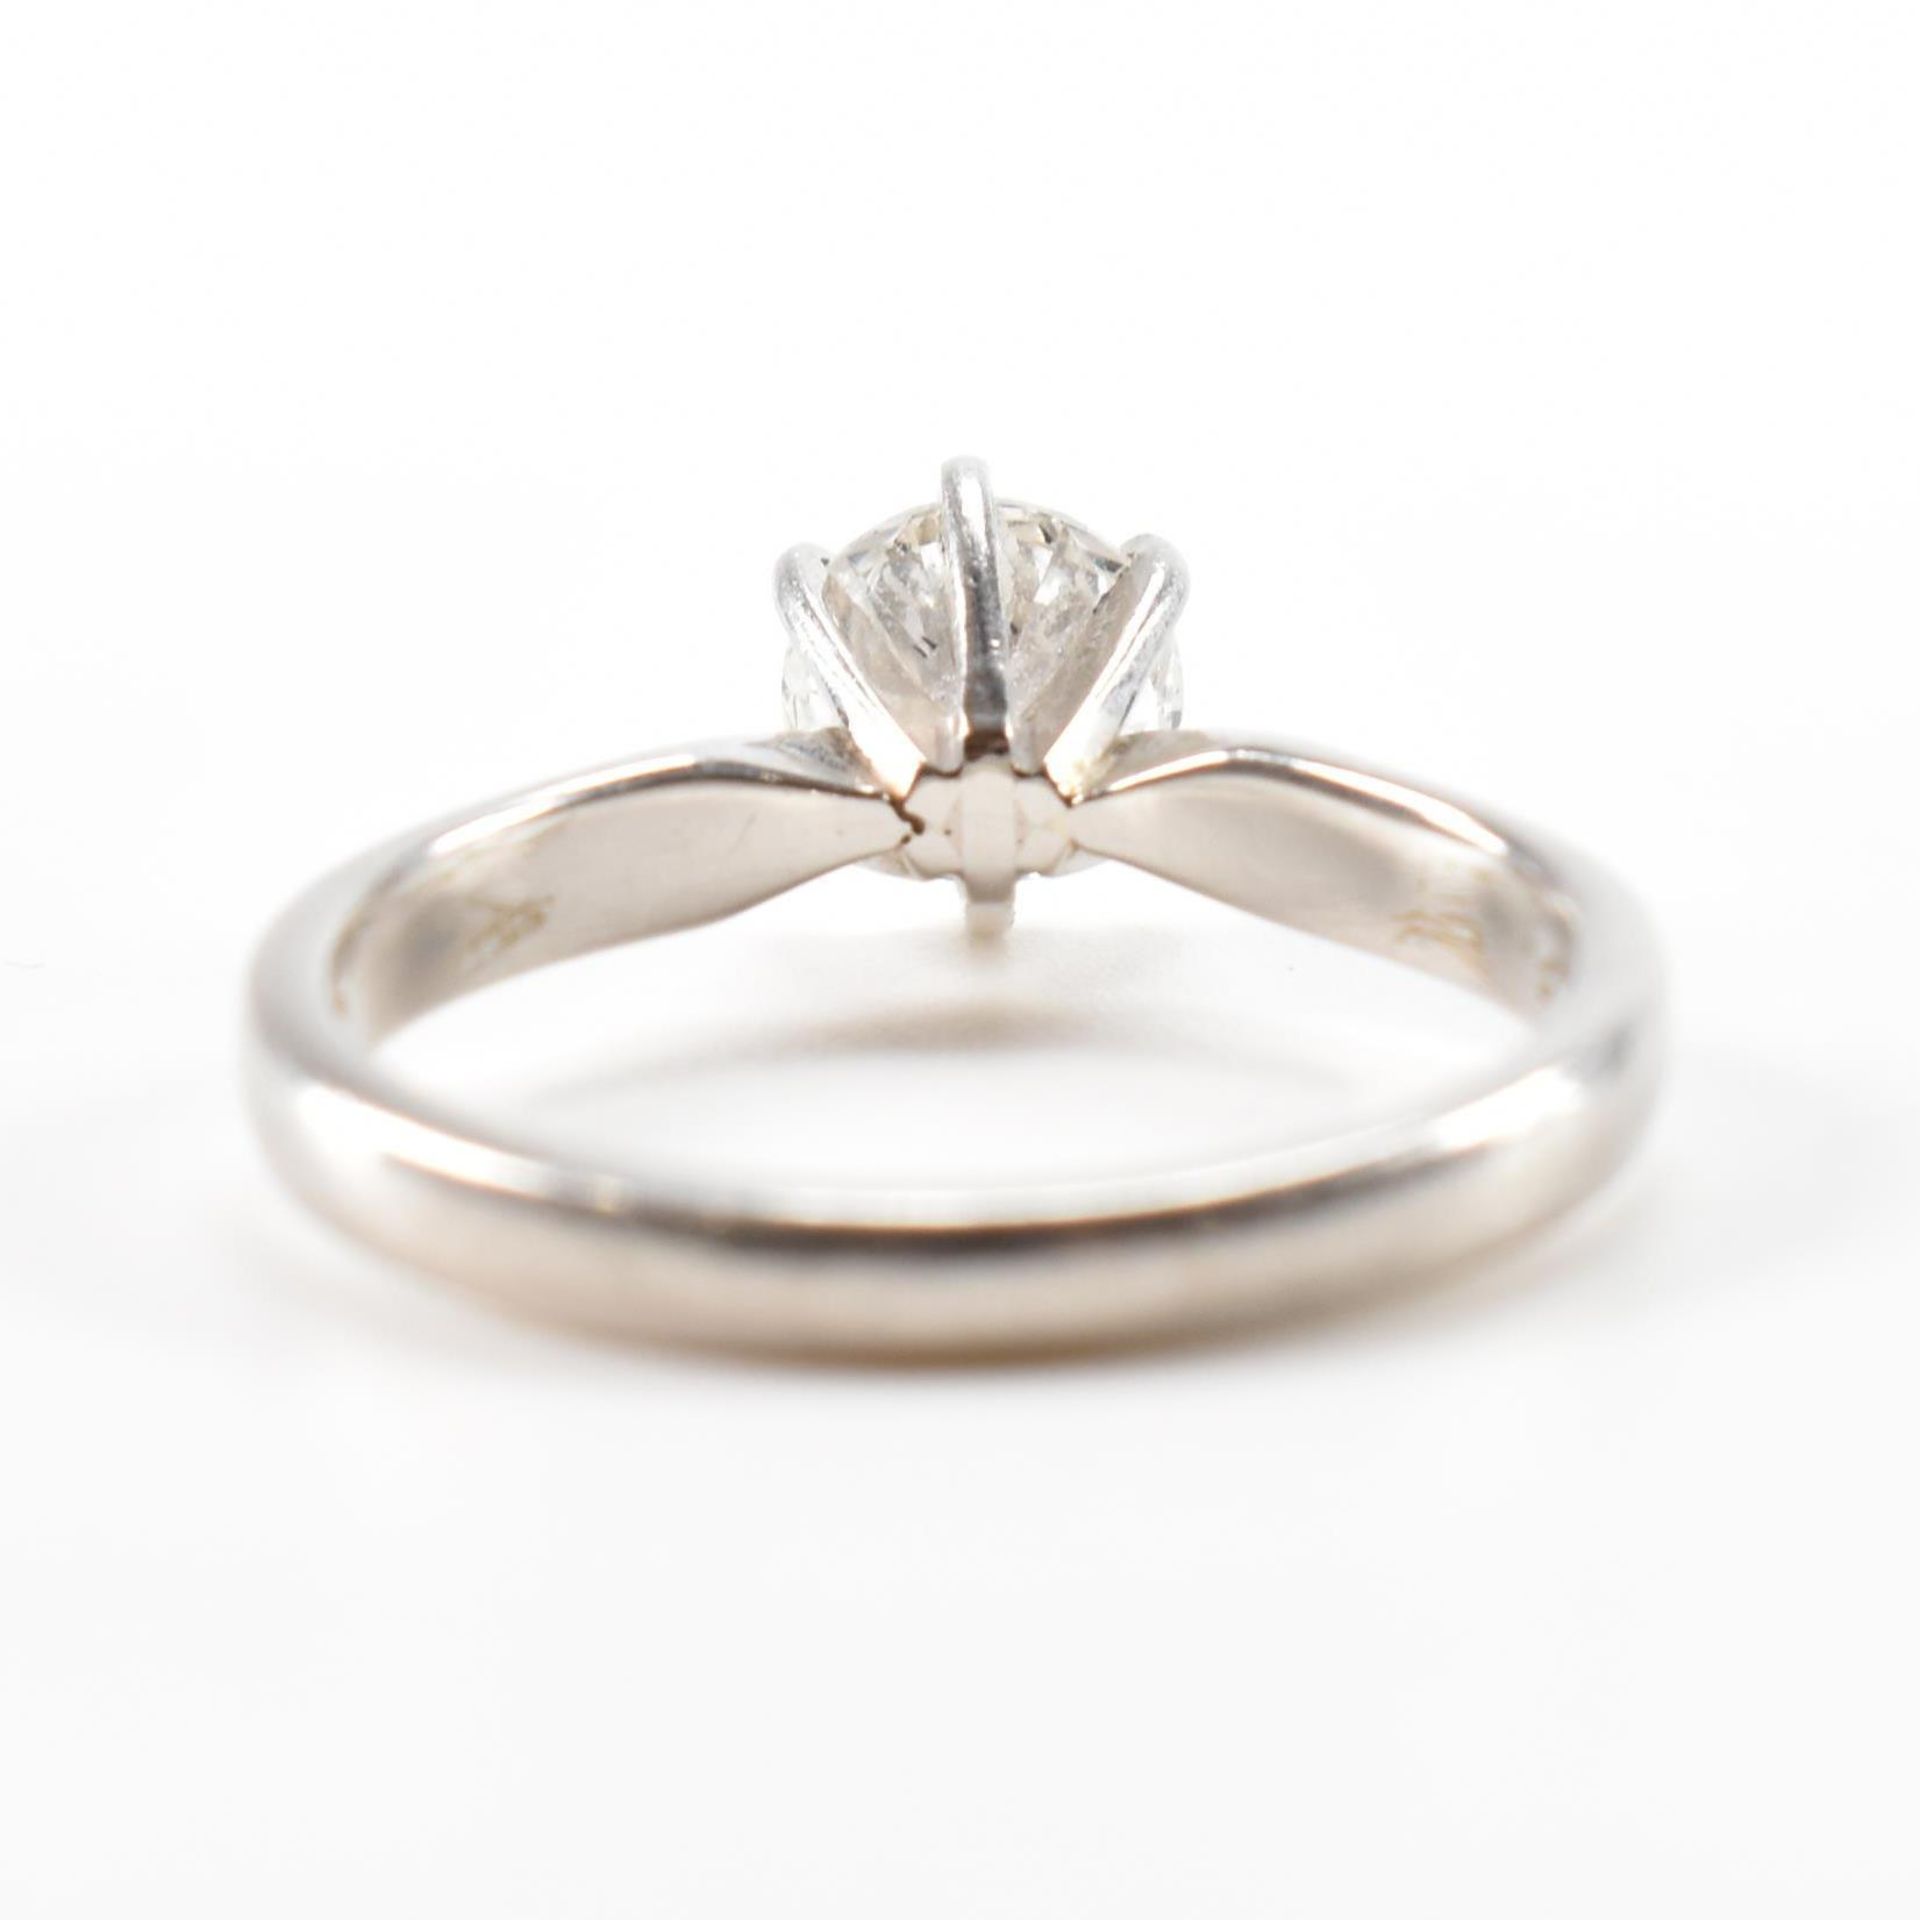 1CT DIAMOND SOLITAIRE RING WITH GIA REPORT - Image 4 of 10